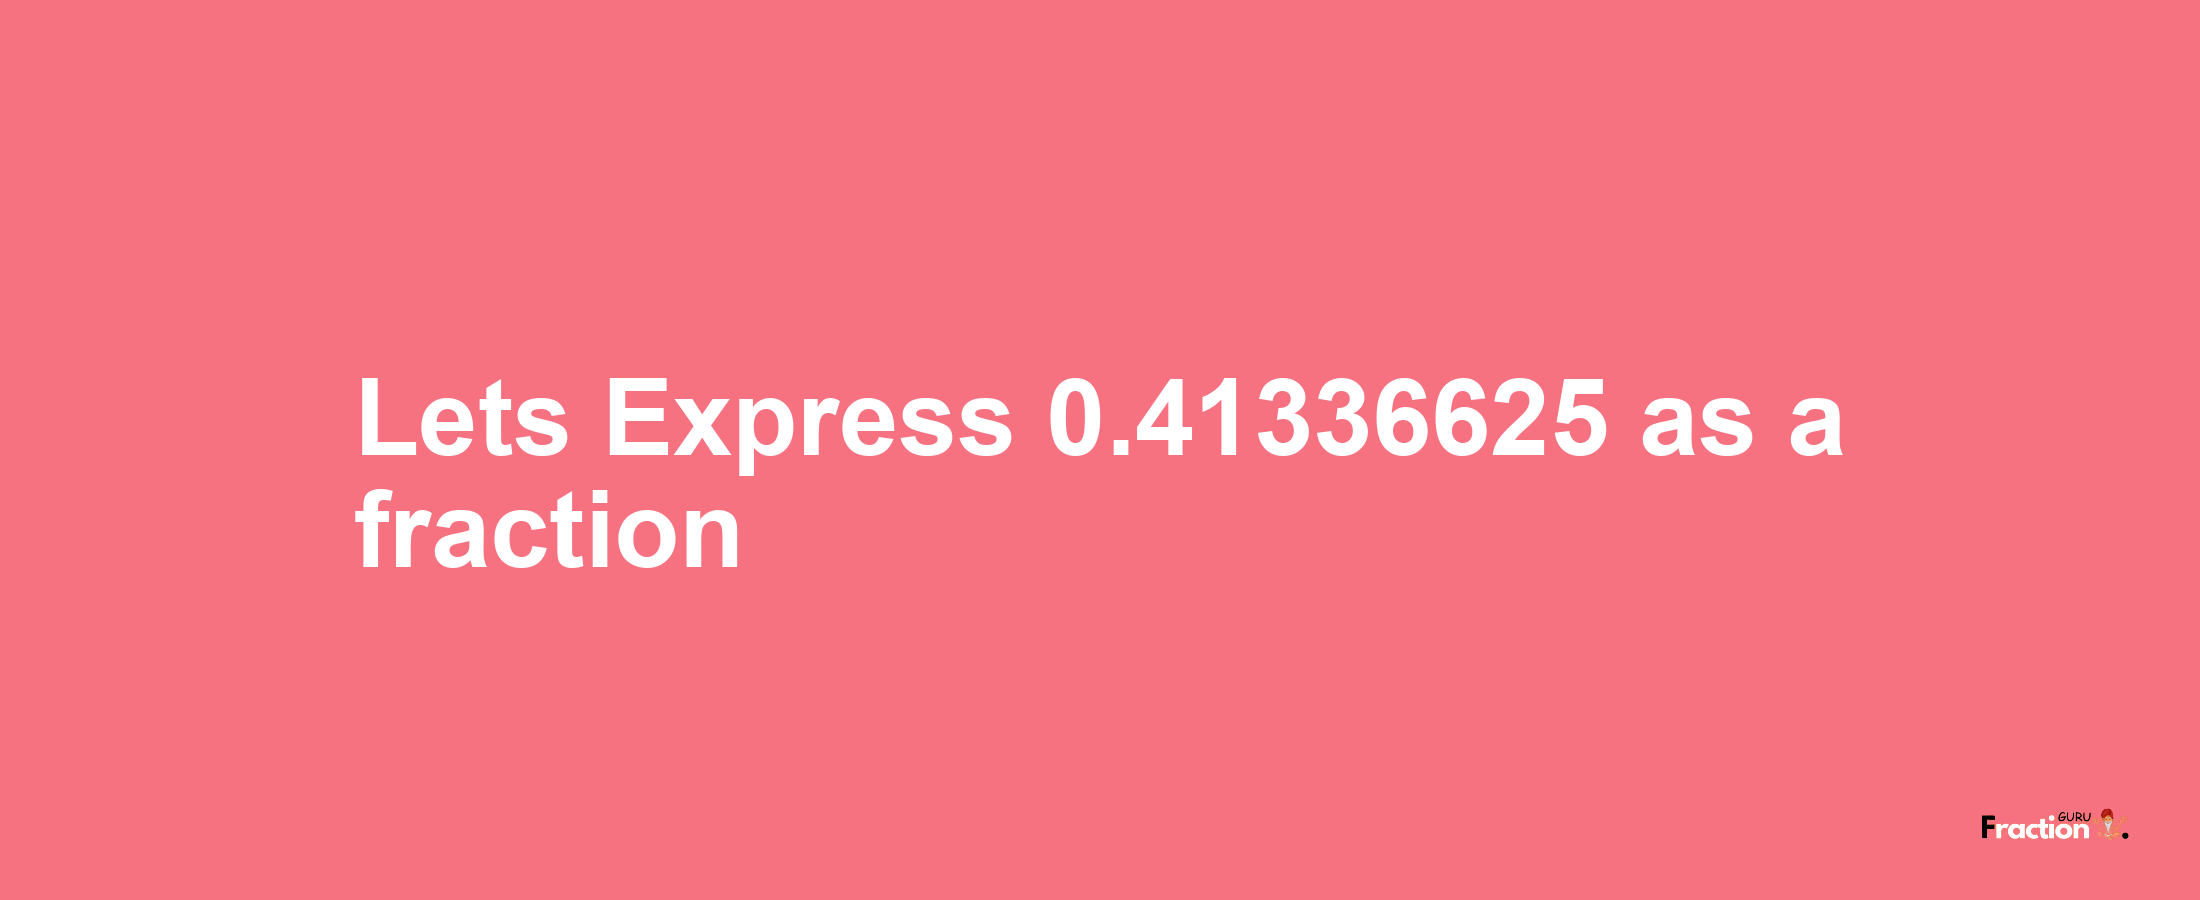 Lets Express 0.41336625 as afraction